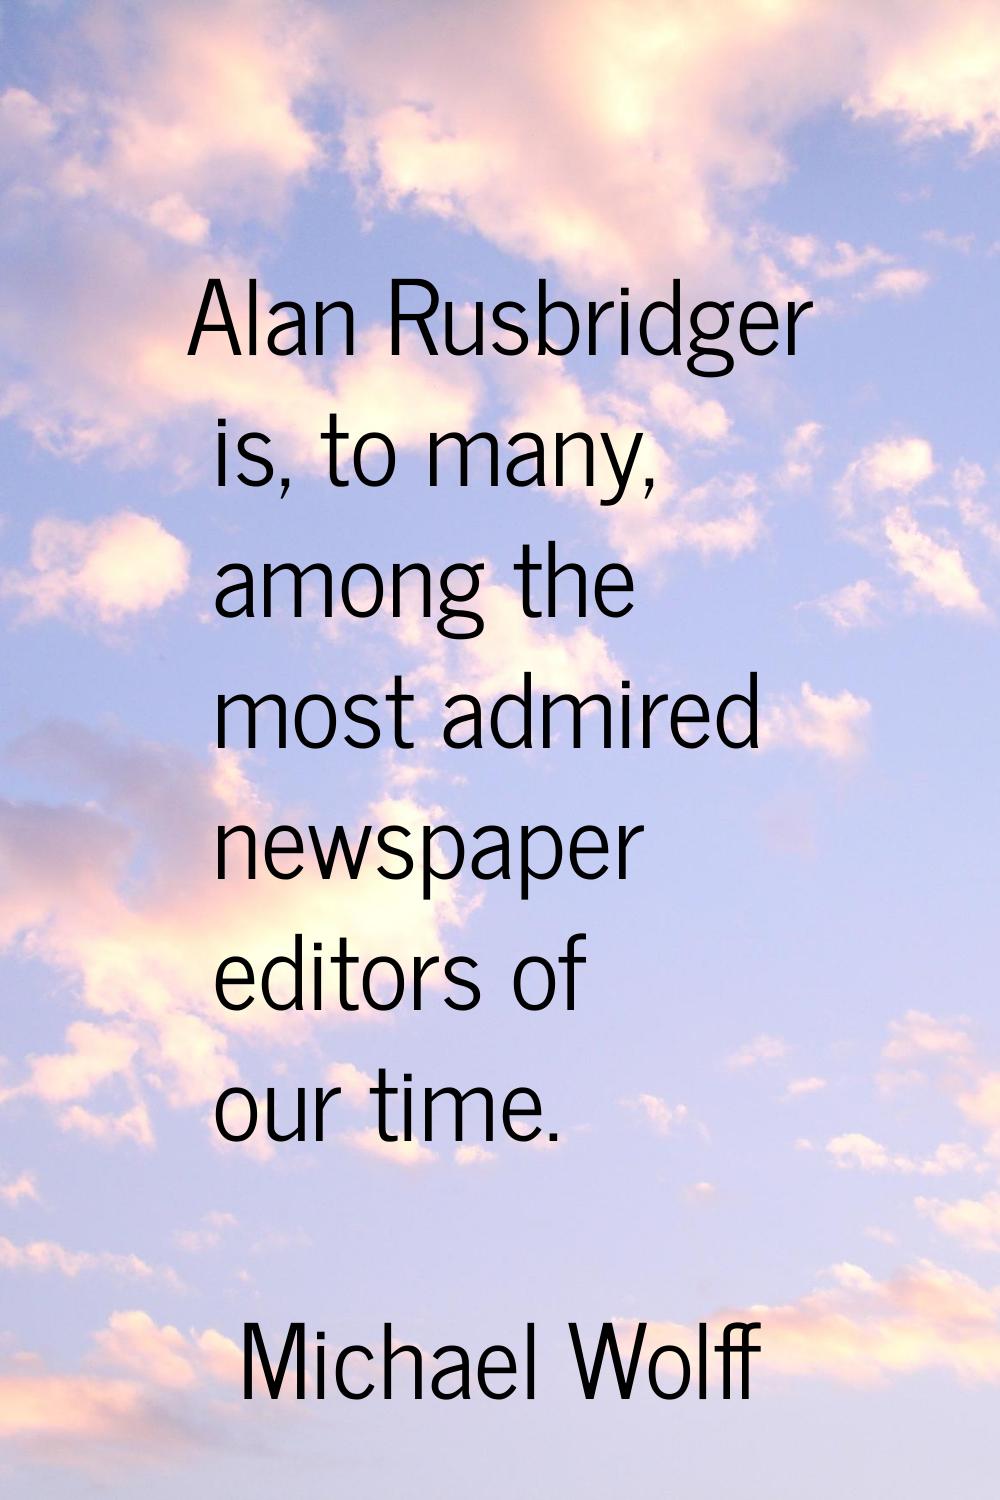 Alan Rusbridger is, to many, among the most admired newspaper editors of our time.